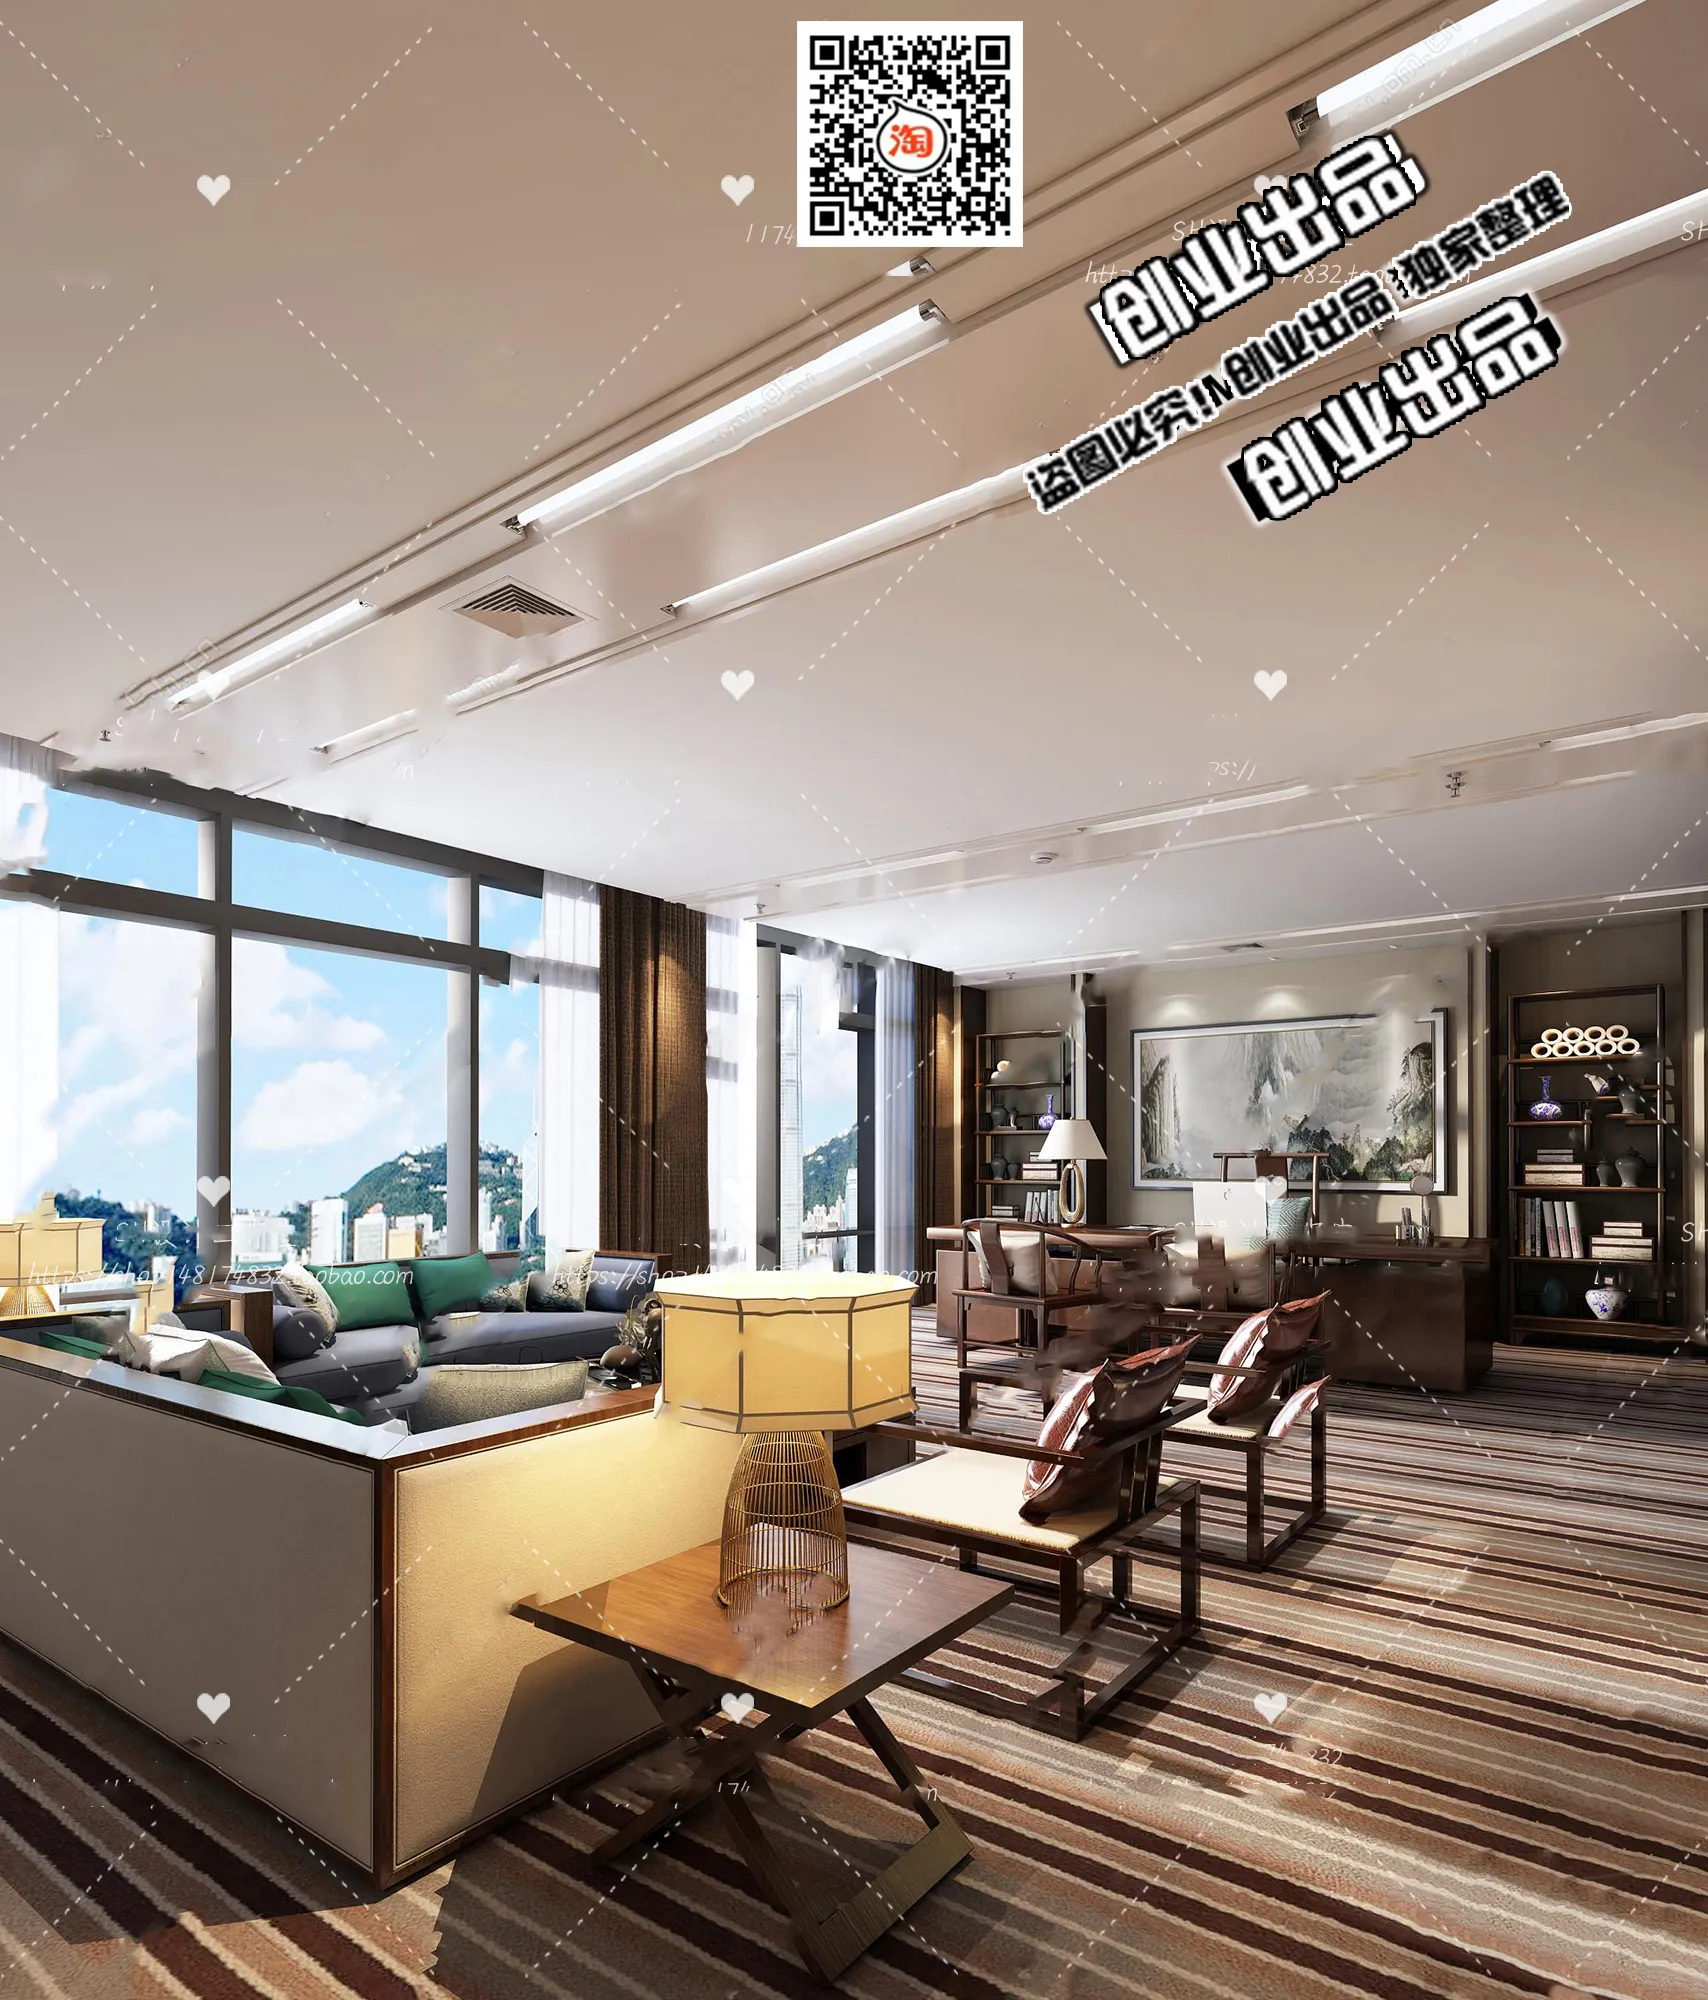 3D OFFICE INTERIOR (VRAY) – MANAGER ROOM 3D SCENES – 161